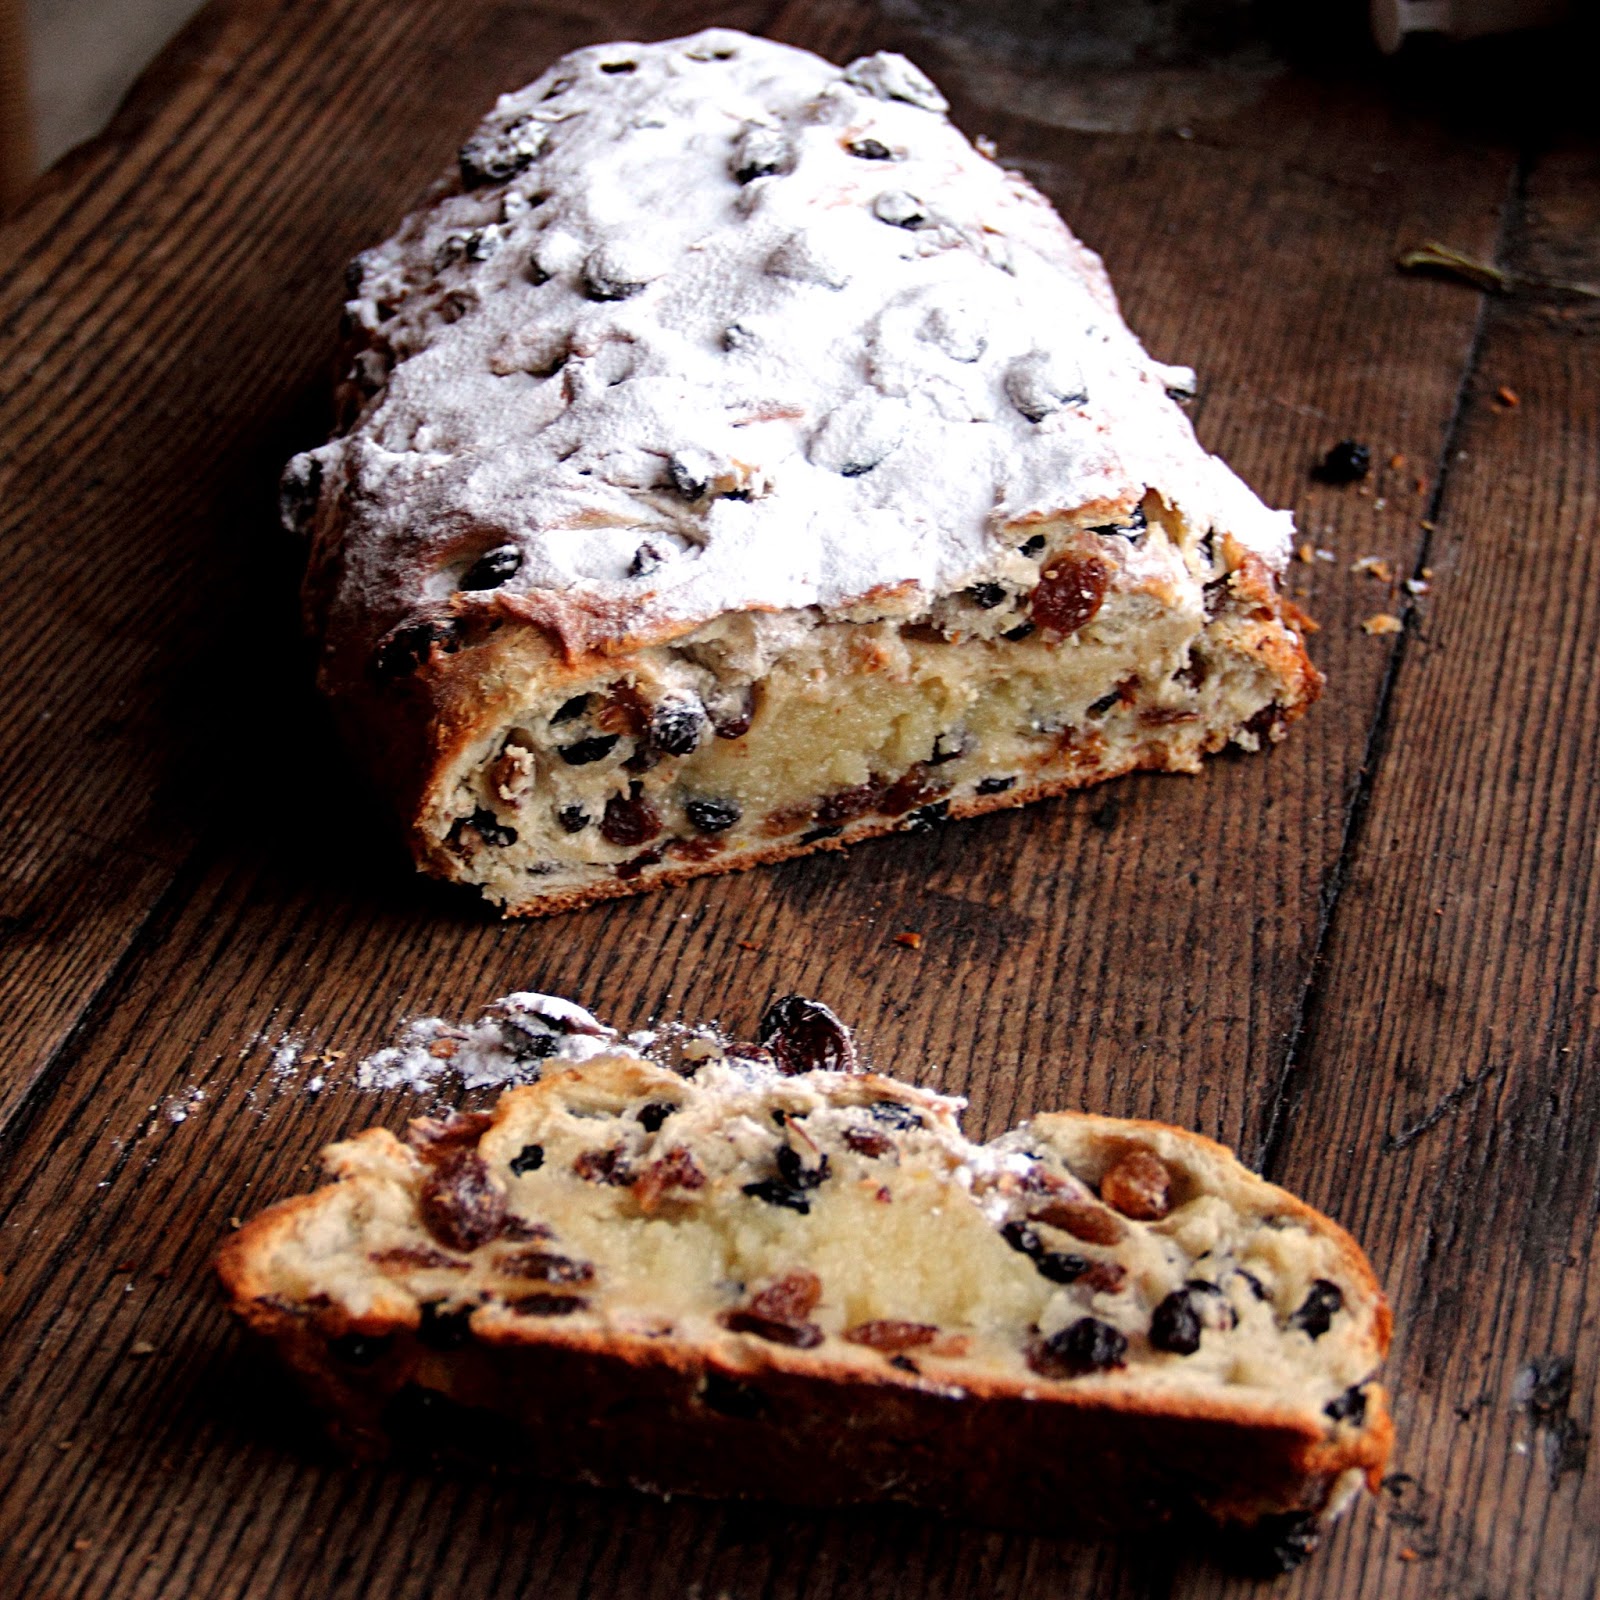 The ultimate in festive breads, Kerststol, or Christmas stollen ...